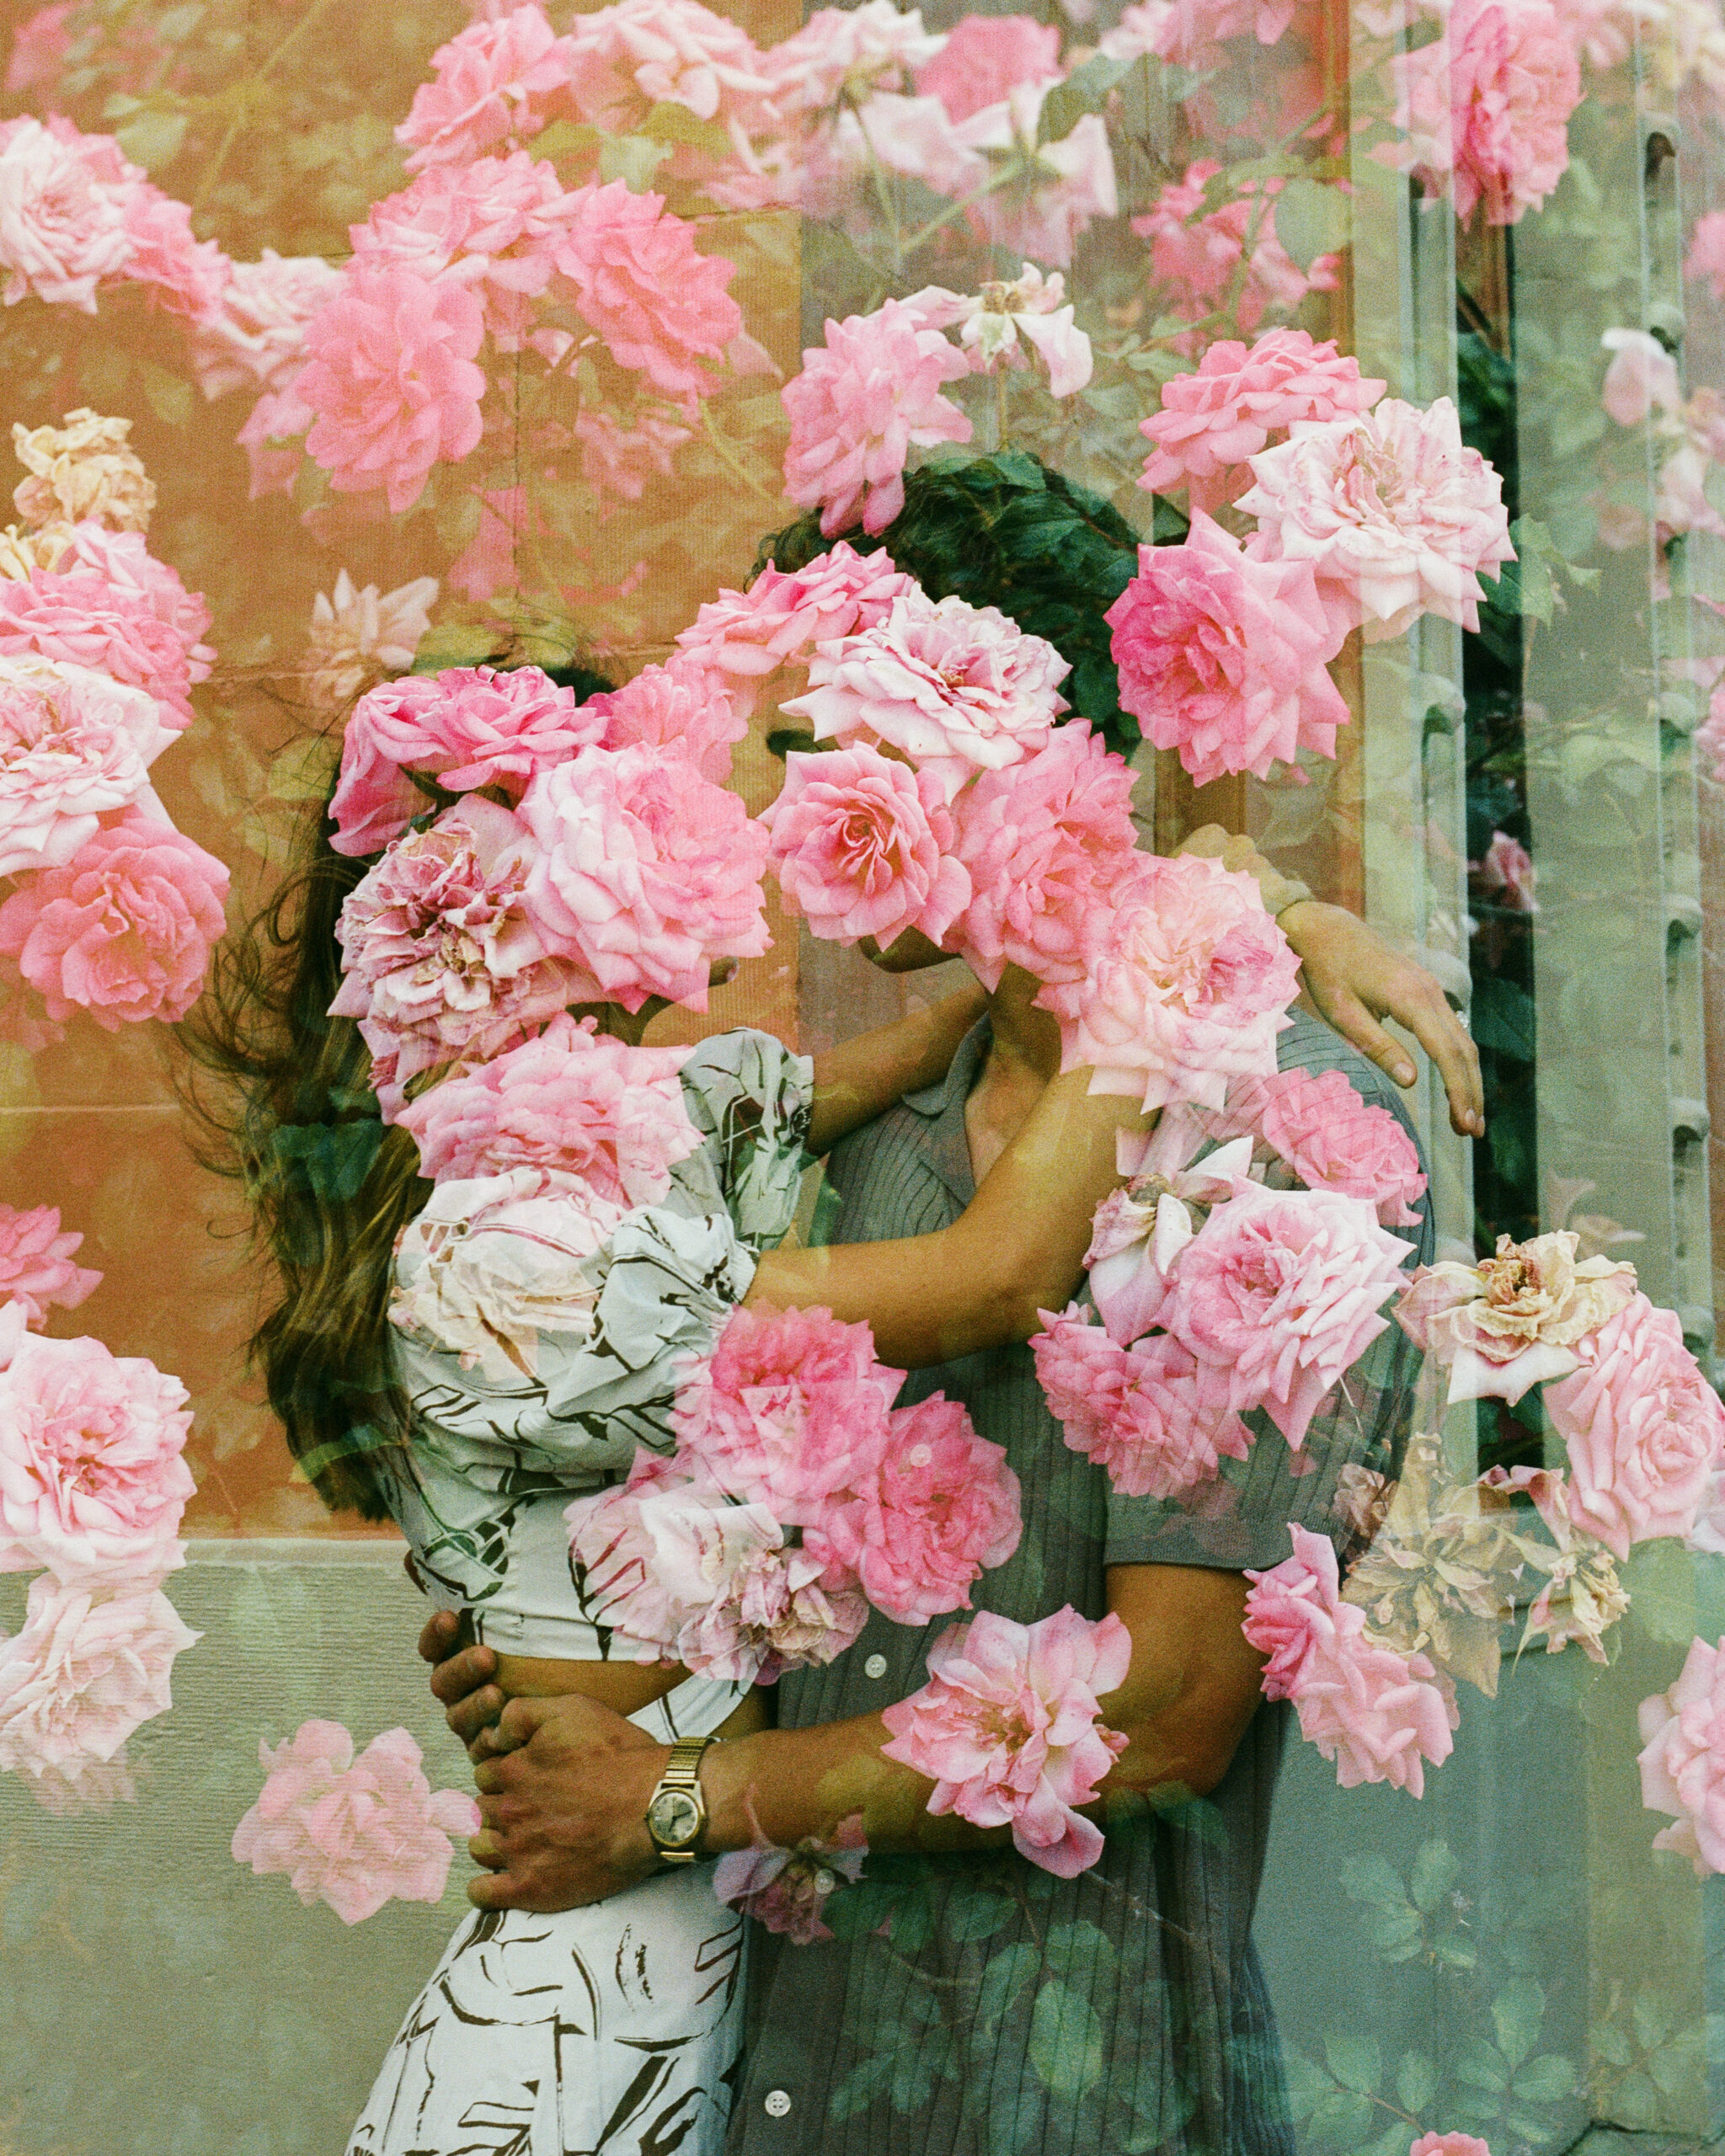 double exposure of couple and pink roses